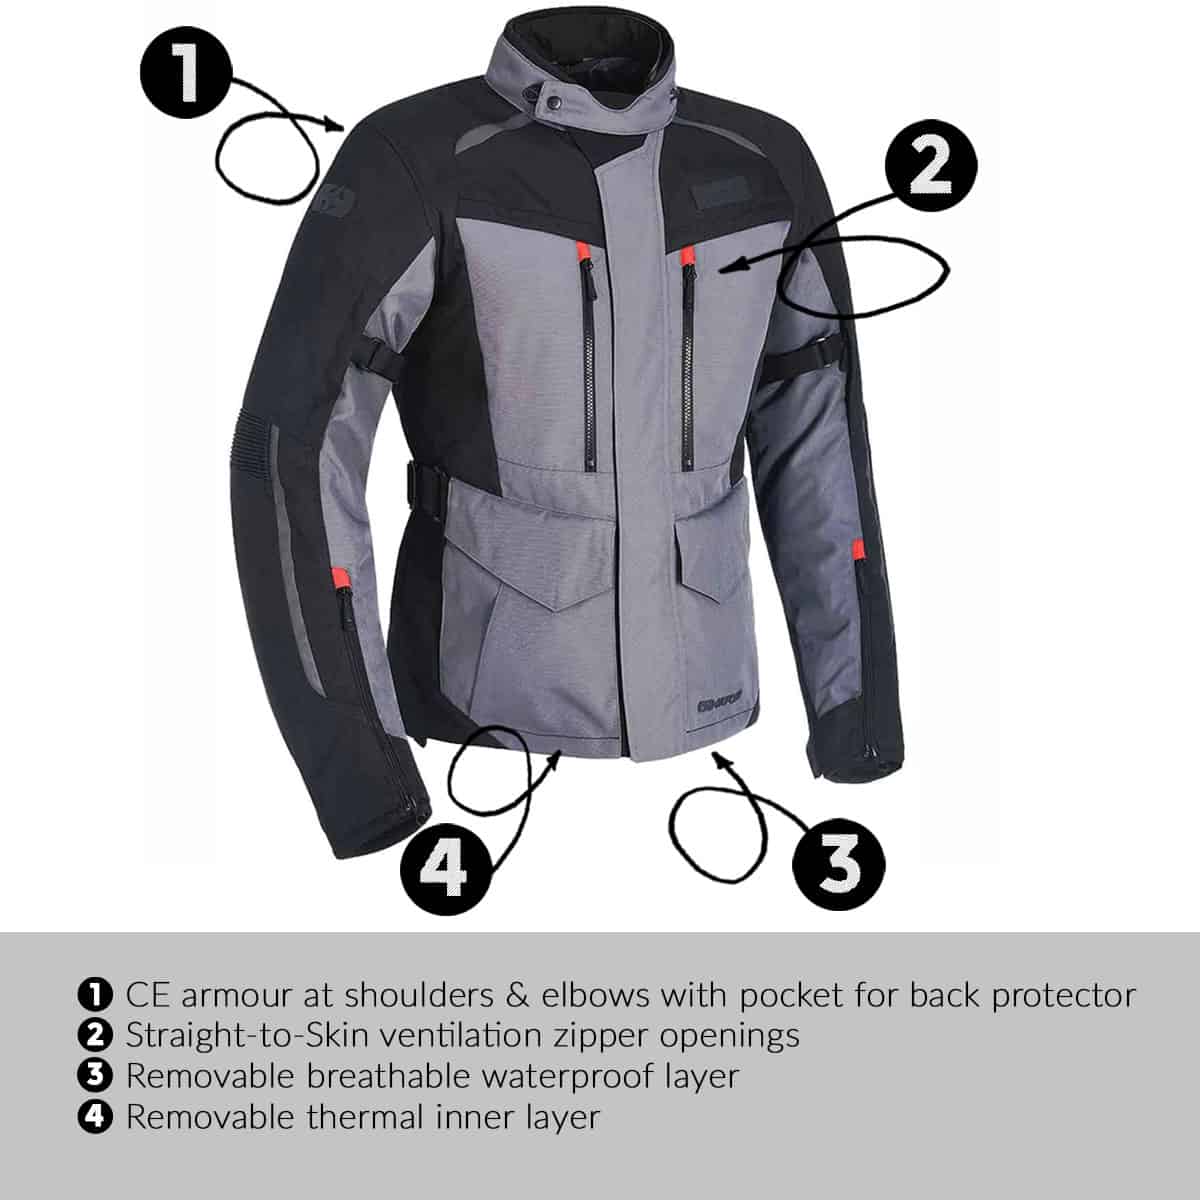 The Oxford Continental: A 3-layer motorcycle jacket that does it all